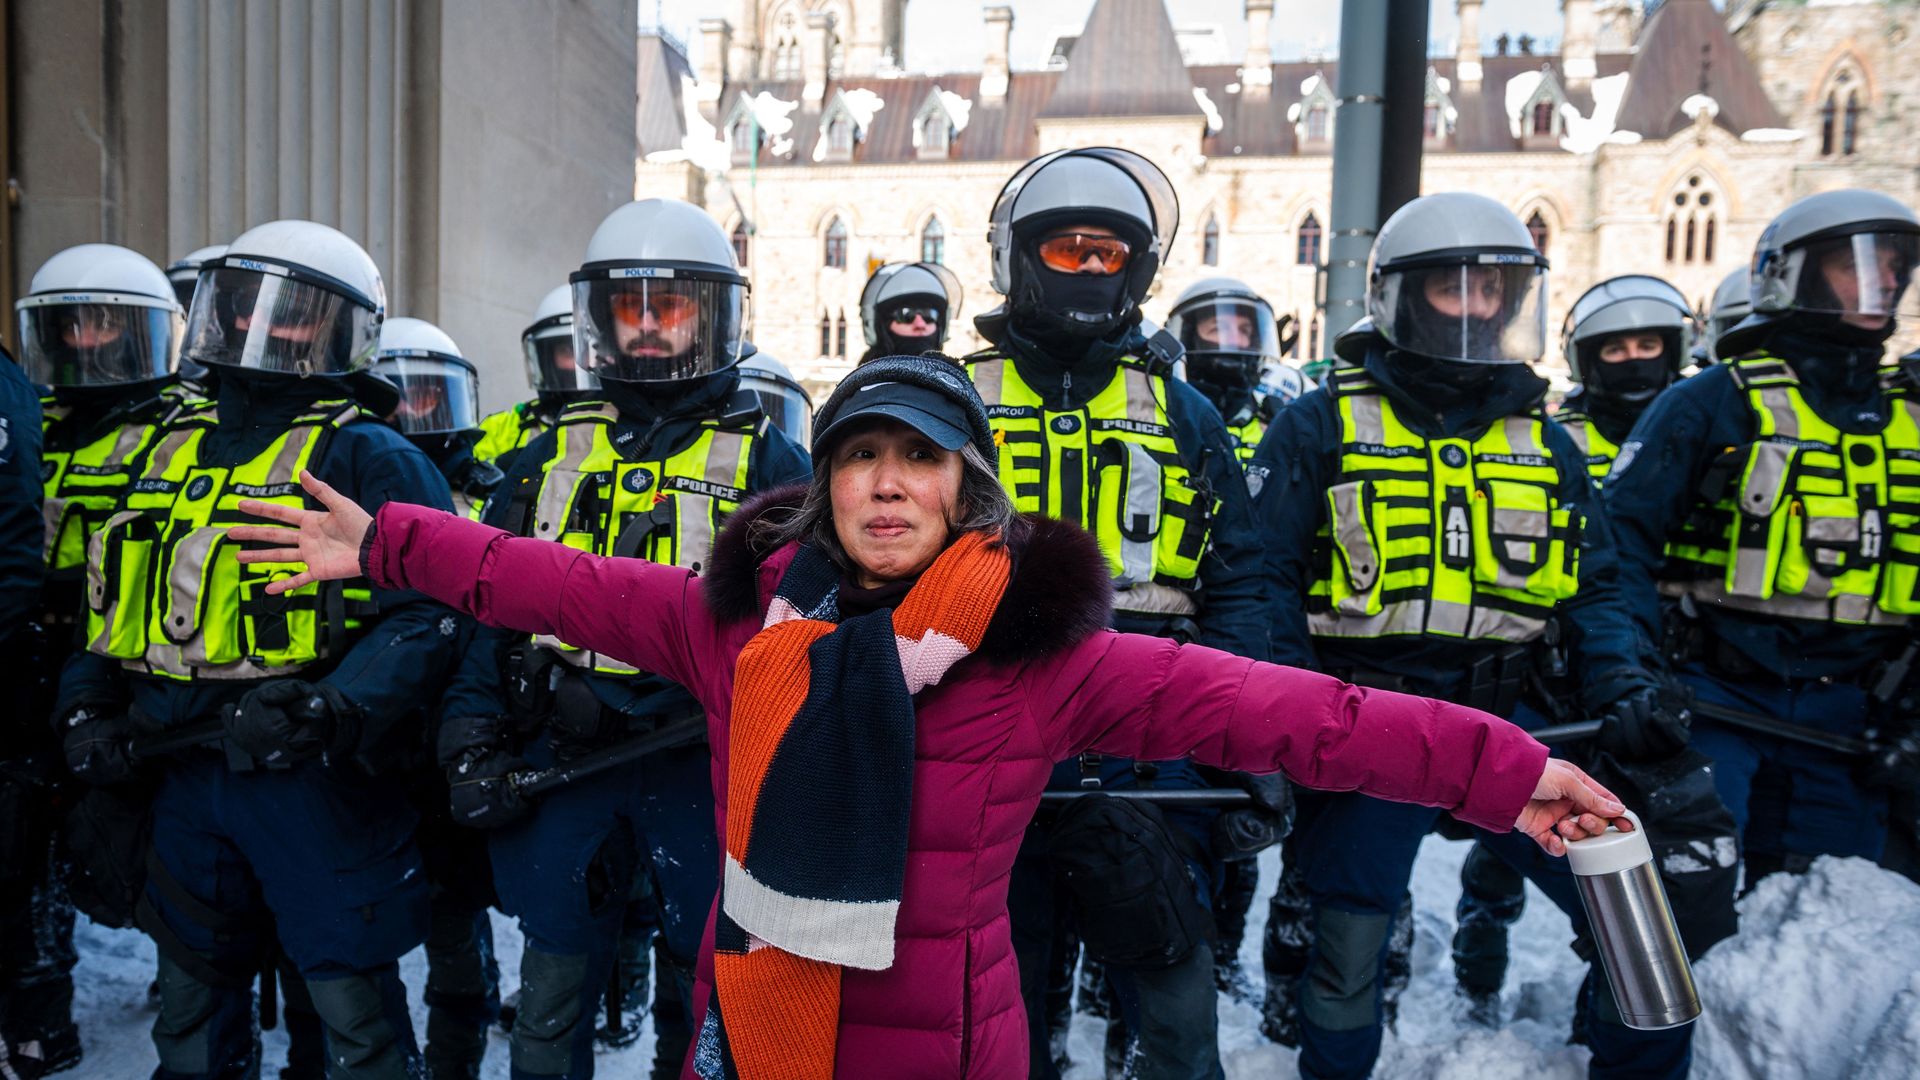 A demonstrator blocks police as they deploy to remove protesters on February 19, 2022, in Ottawa, Canada.